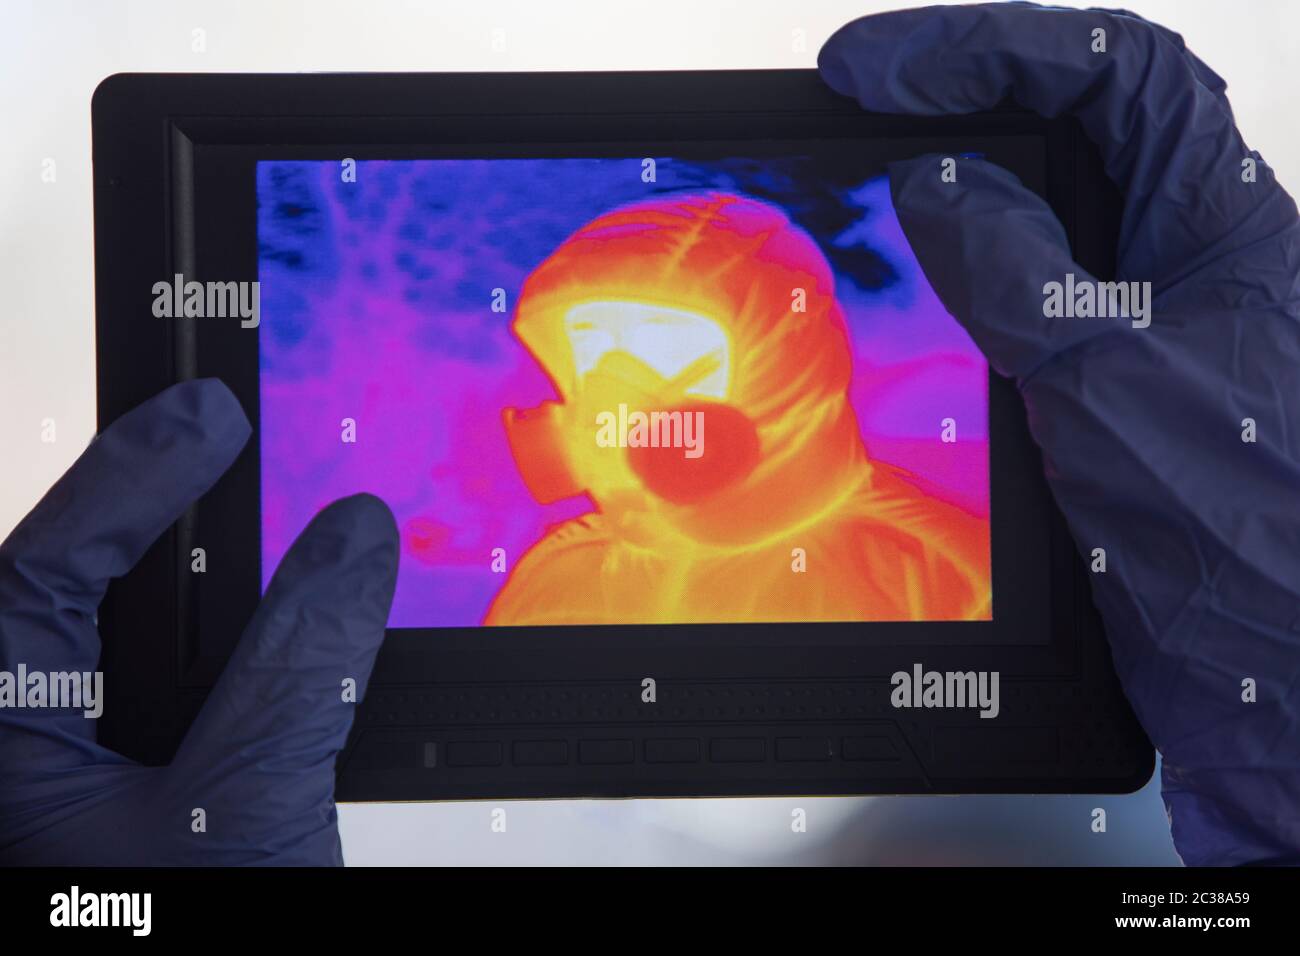 Thermal camera view of an unrecognizable person with a face mask. Hands with dark blue plastic gloves are holding the monitor. Corona Covid 19 theme f Stock Photo